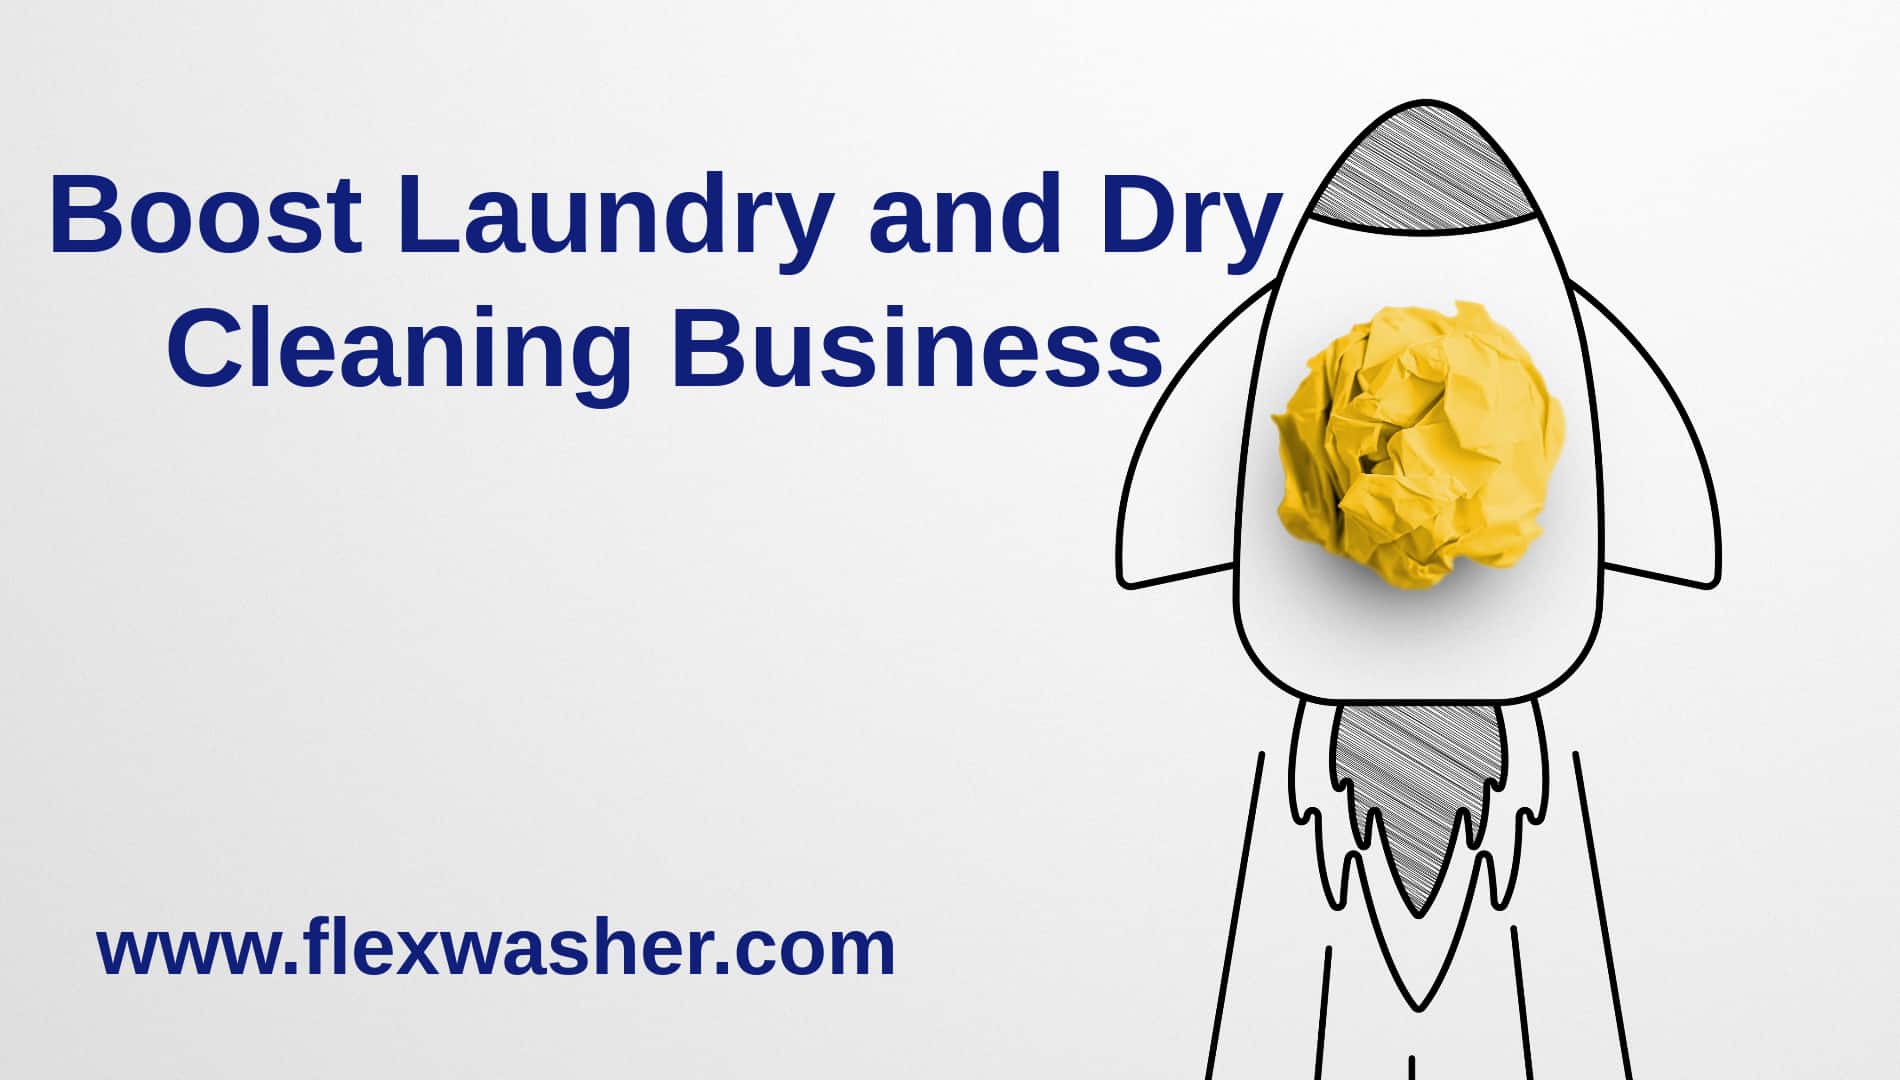 The Power of consumer Insights for Laundry, Dry Clean Business